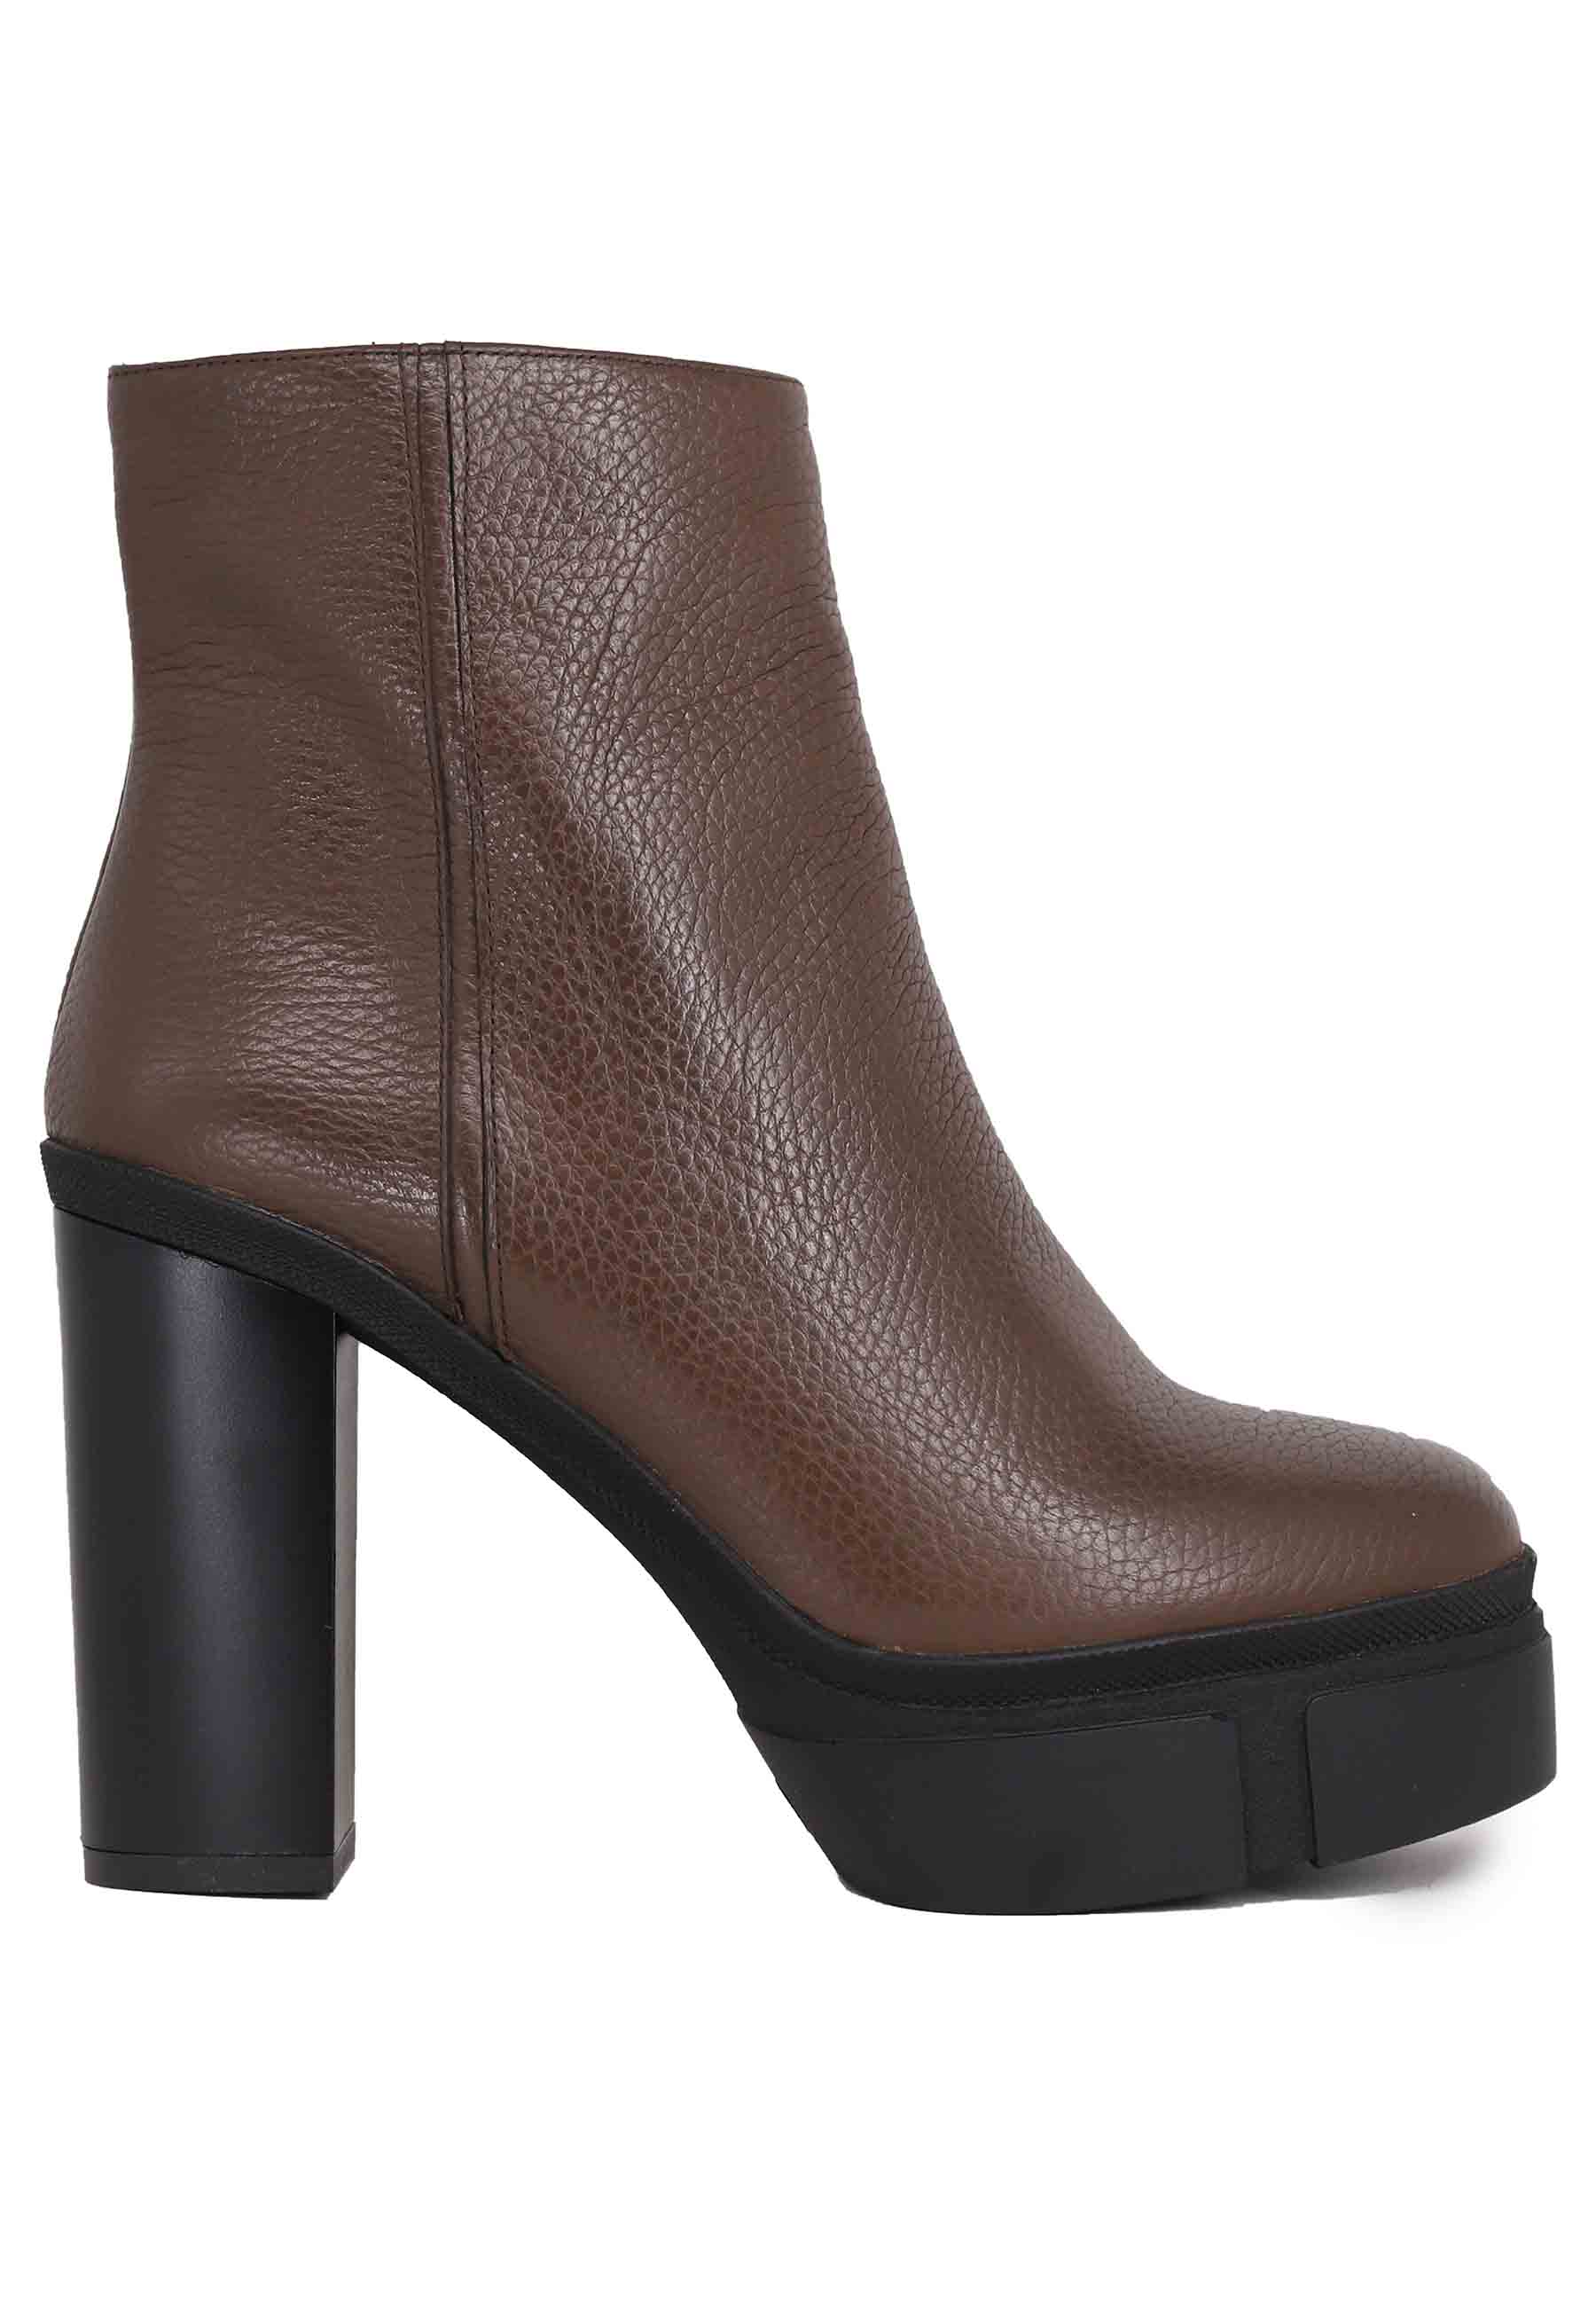 Women's ankle boots in dark brown leather with high heel and platform